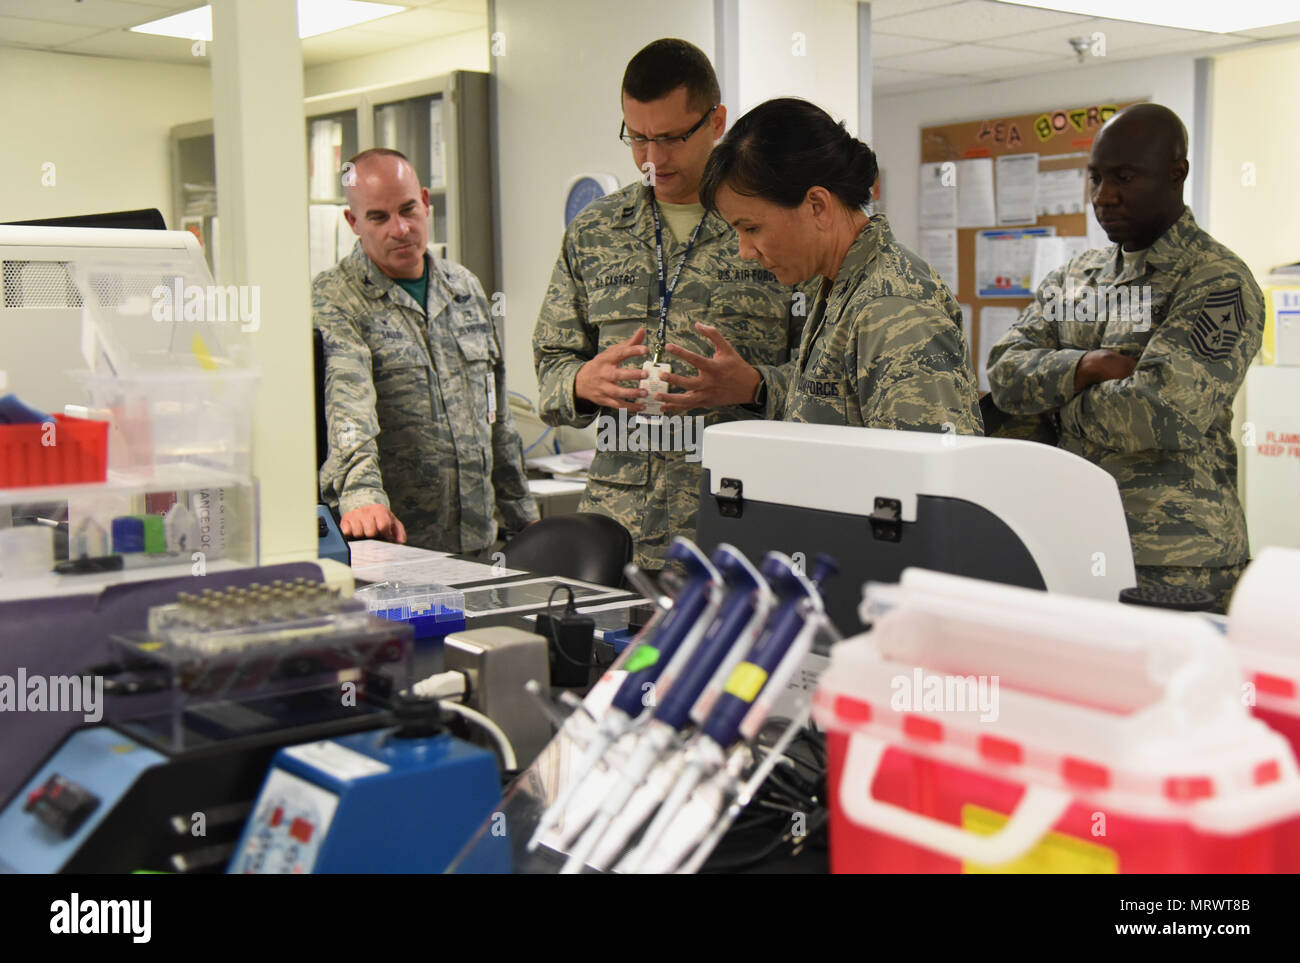 Capt. Mauricio De Castro Pretelt, 81st Medical Operations Squadron clinical and molecular geneticist, briefs Col. Debra Lovette, 81st Training Wing commander, on genetics laboratory capabilities and procedures during an 81st Medical Group orientation tour in the Keesler Medical Center June 16, 2017, on Keesler Air Force Base, Miss. The purpose of the tour was to familiarize Lovette with the group’s mission, operations and personnel. (U.S. Air Force photo by Kemberly Groue) Stock Photo